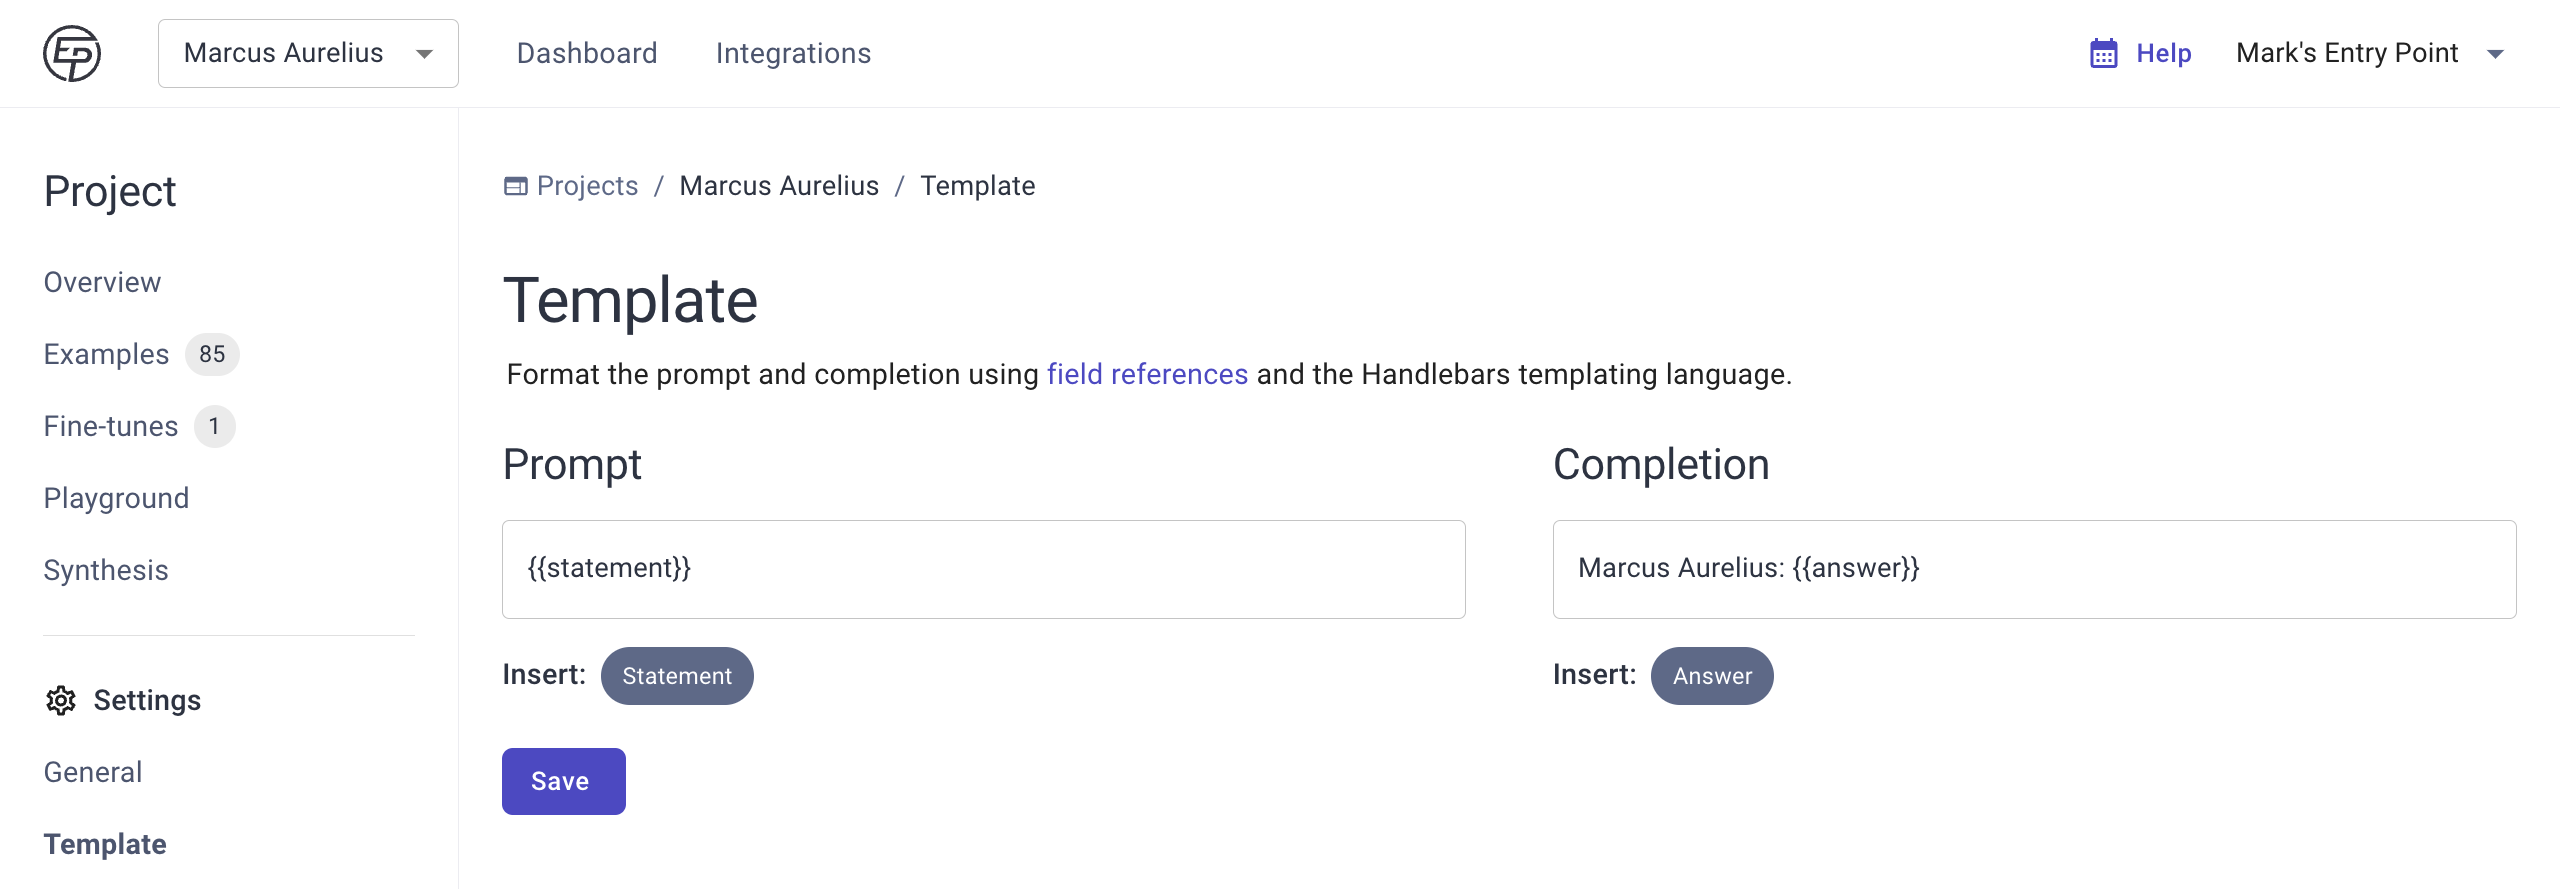 Fine-tuning Prompt and Completion Templates